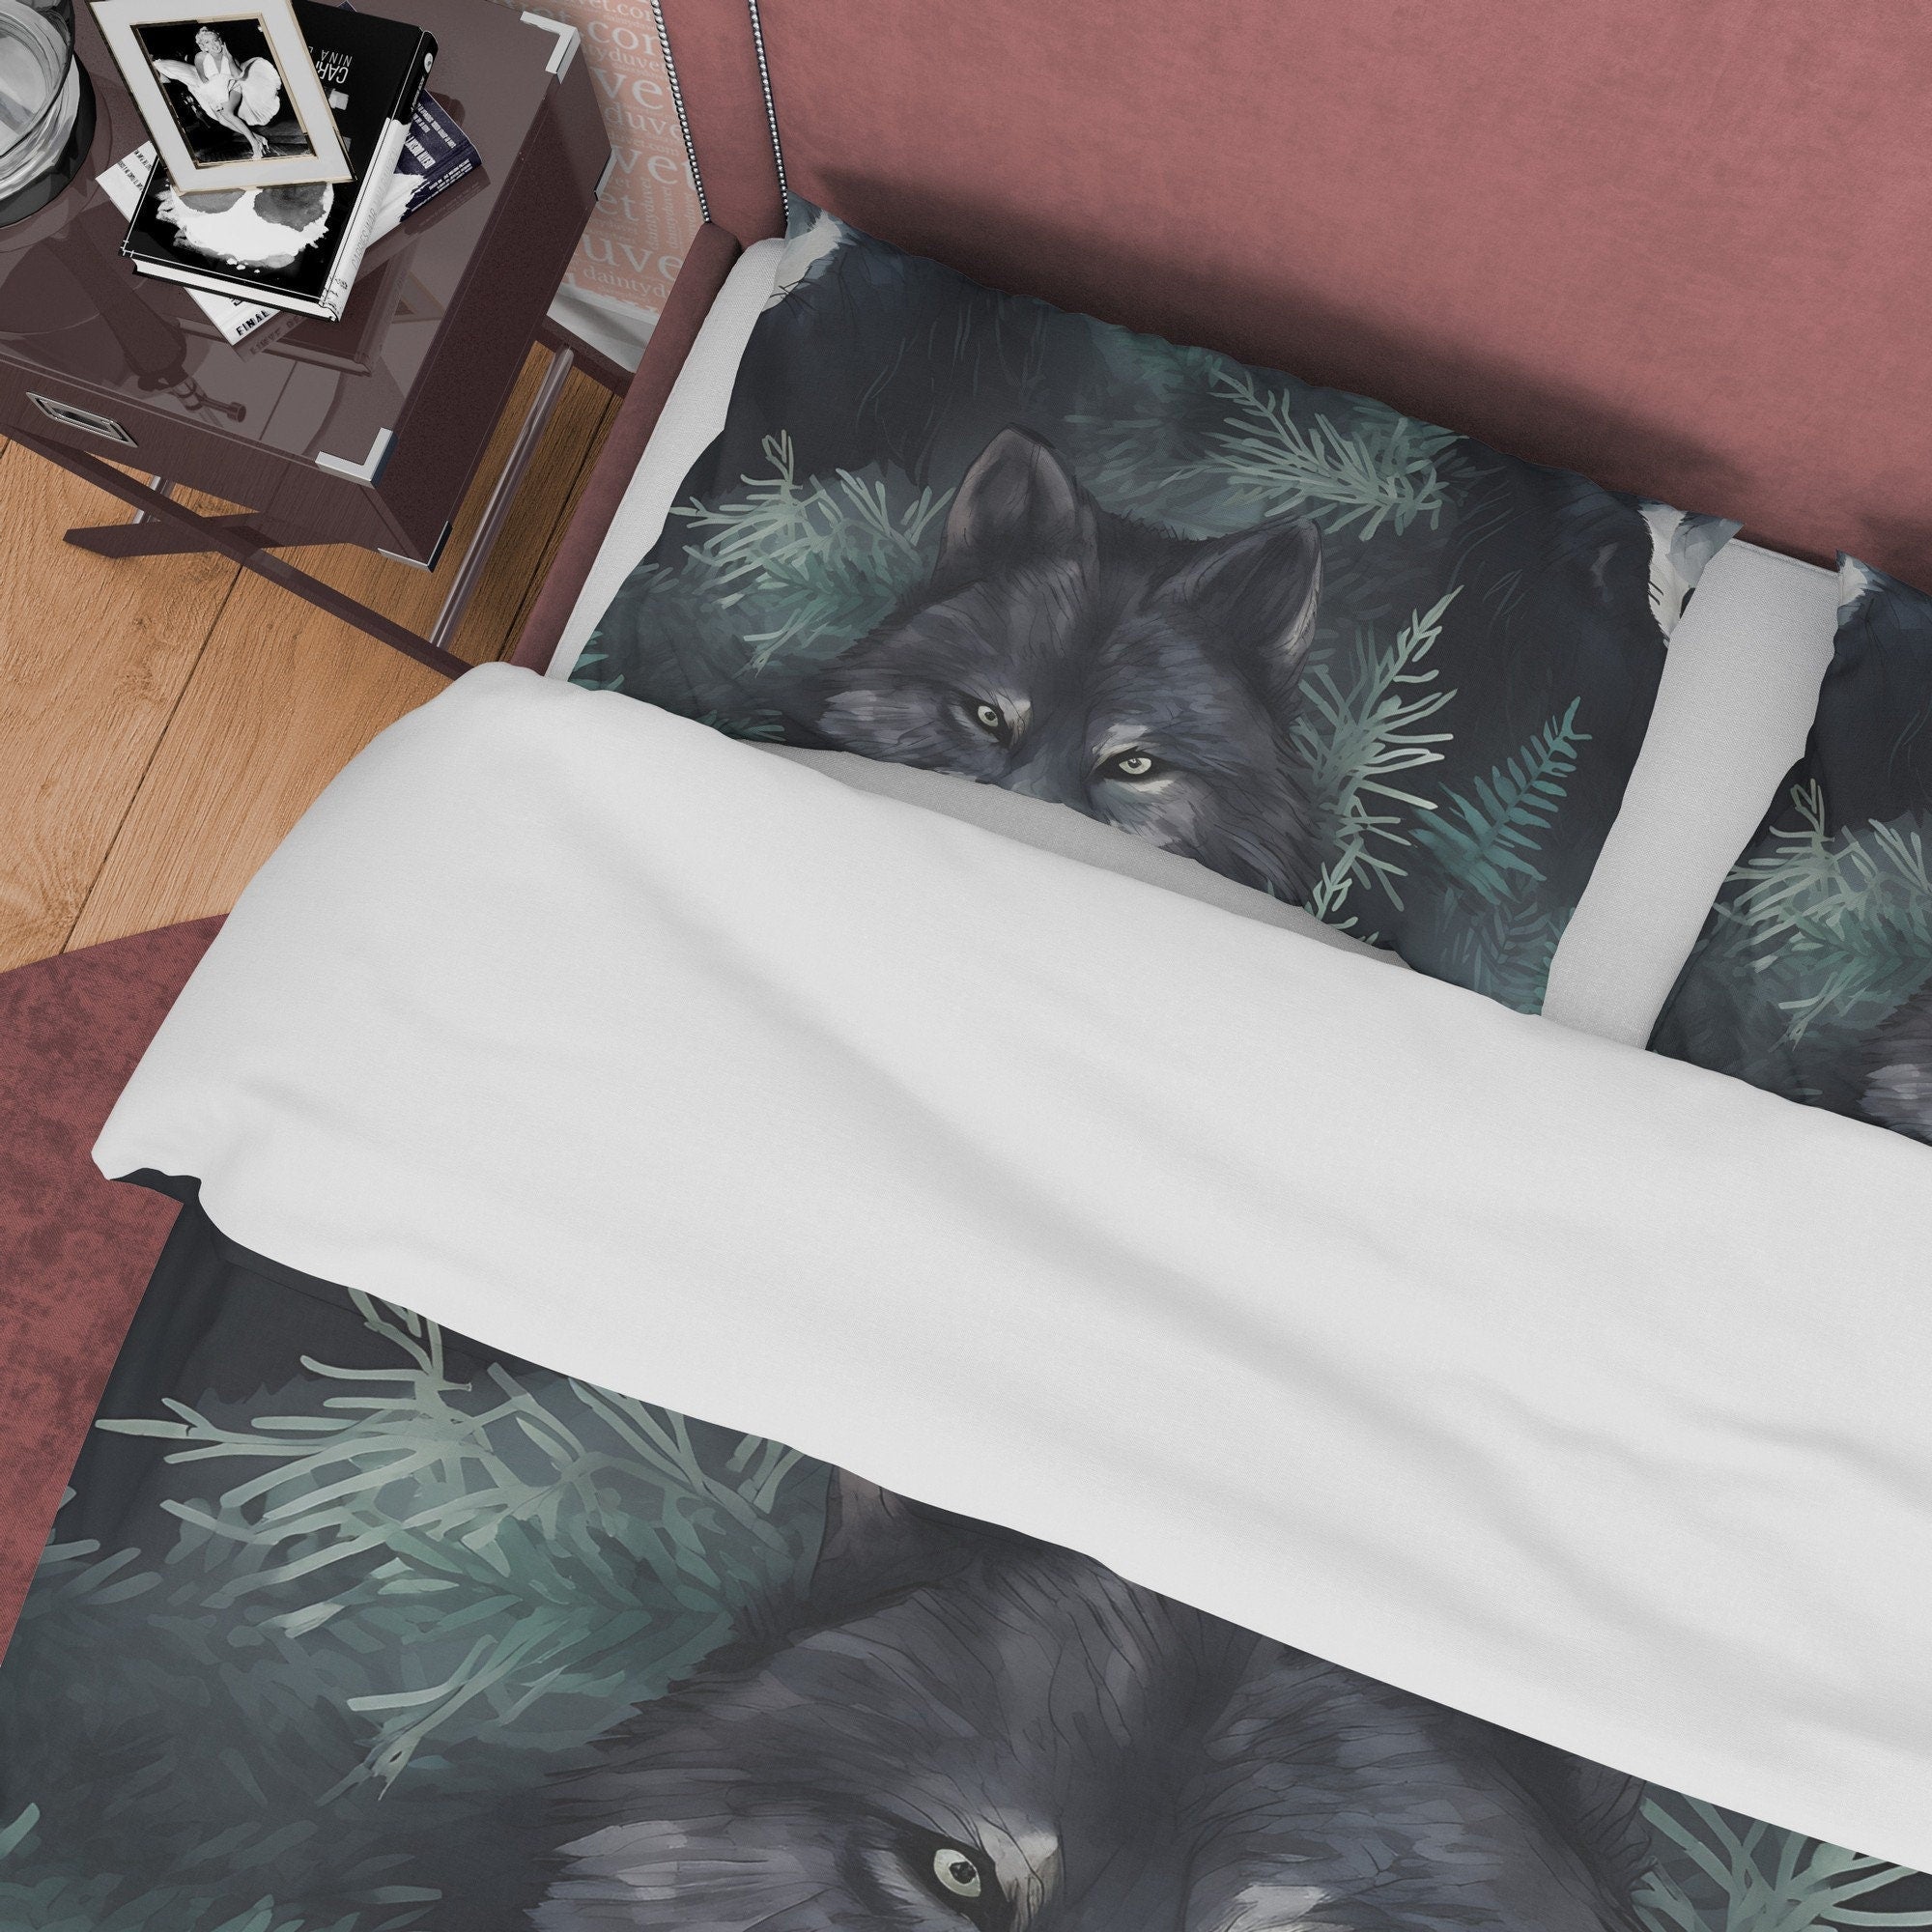 Sneaking Wolf Duvet Cover Set, Halloween Gray Room Decor Aesthetic Zipper Bedding, Fierce Animal Blanket Cover, Scary Forest Bed Cover